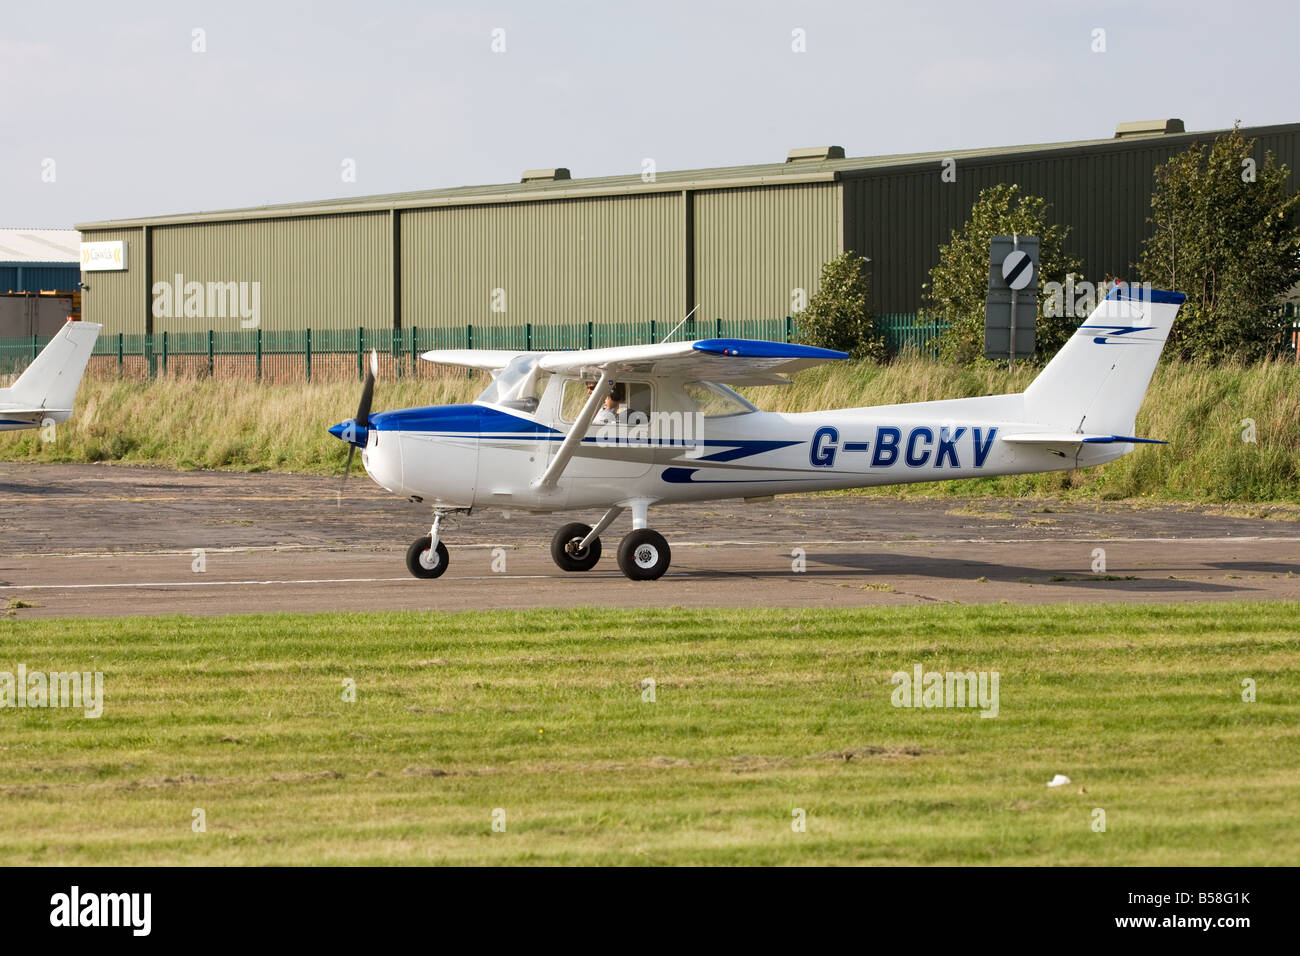 Reims Cessna FRA150L Aerobat G-BCKV lining-up on runway to take-off at Sandtoft Airfield Stock Photo